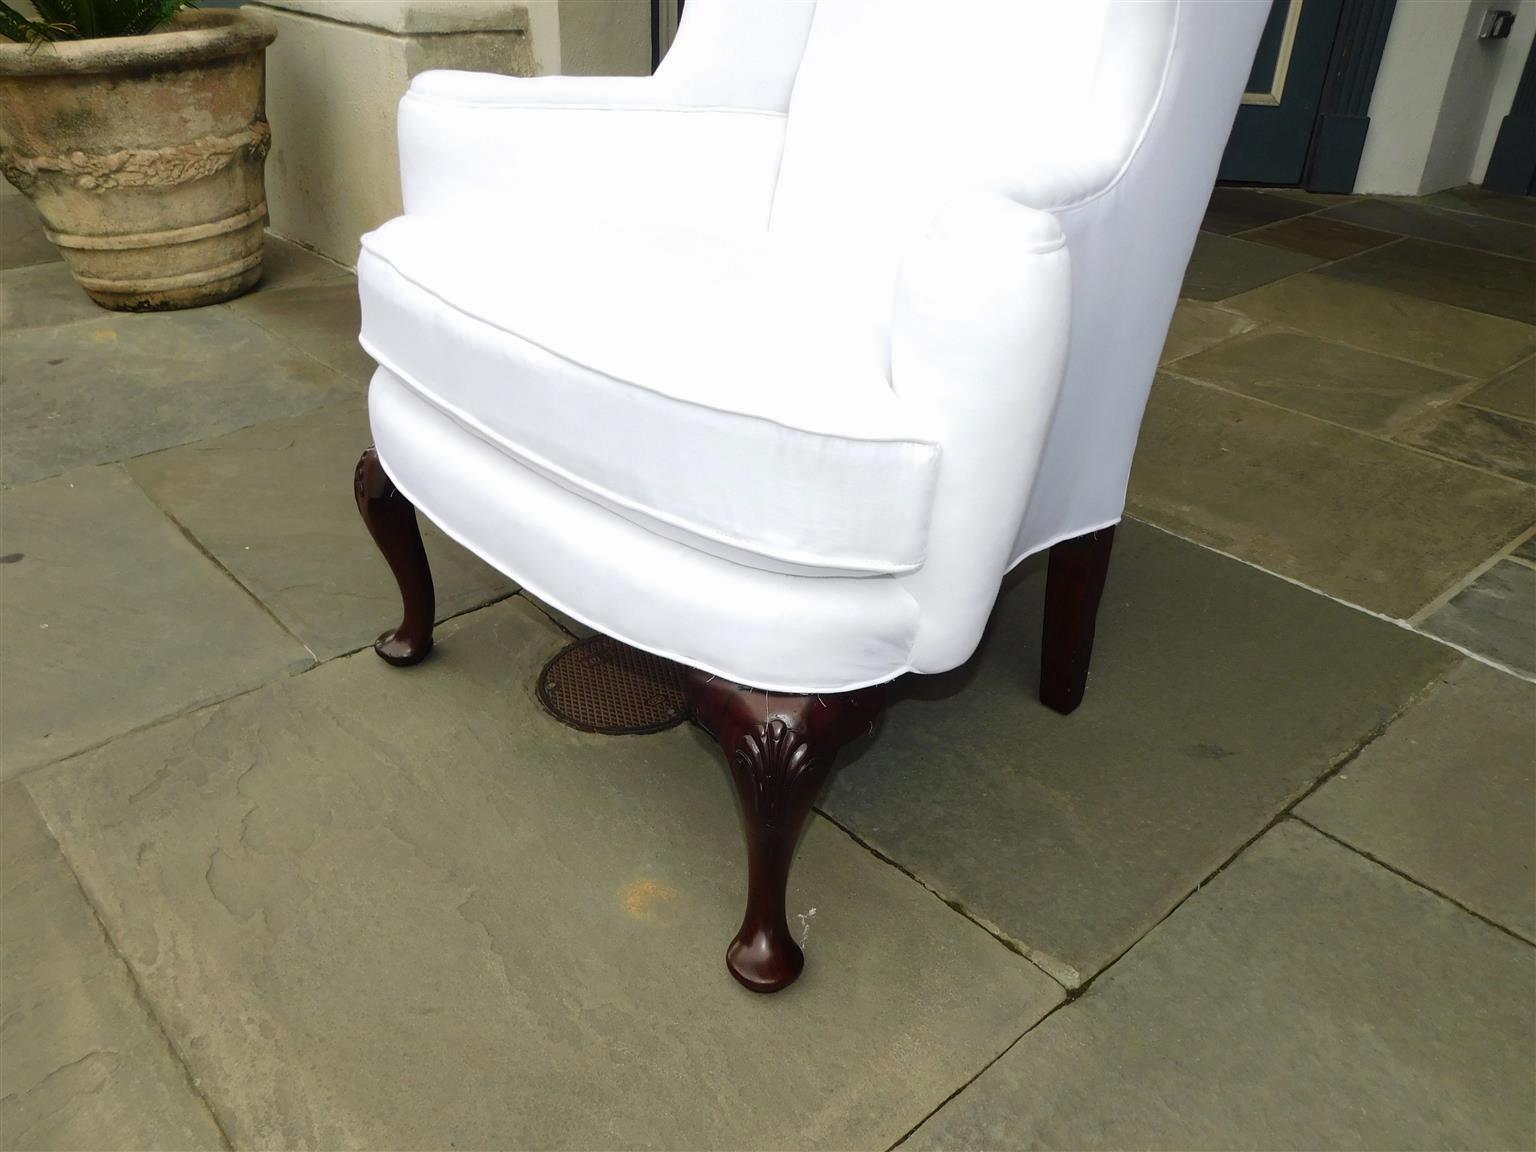 Muslin English Queen Anne Mahogany Wing Back Chair with Shell Knee on Pad Feet, C. 1740 For Sale